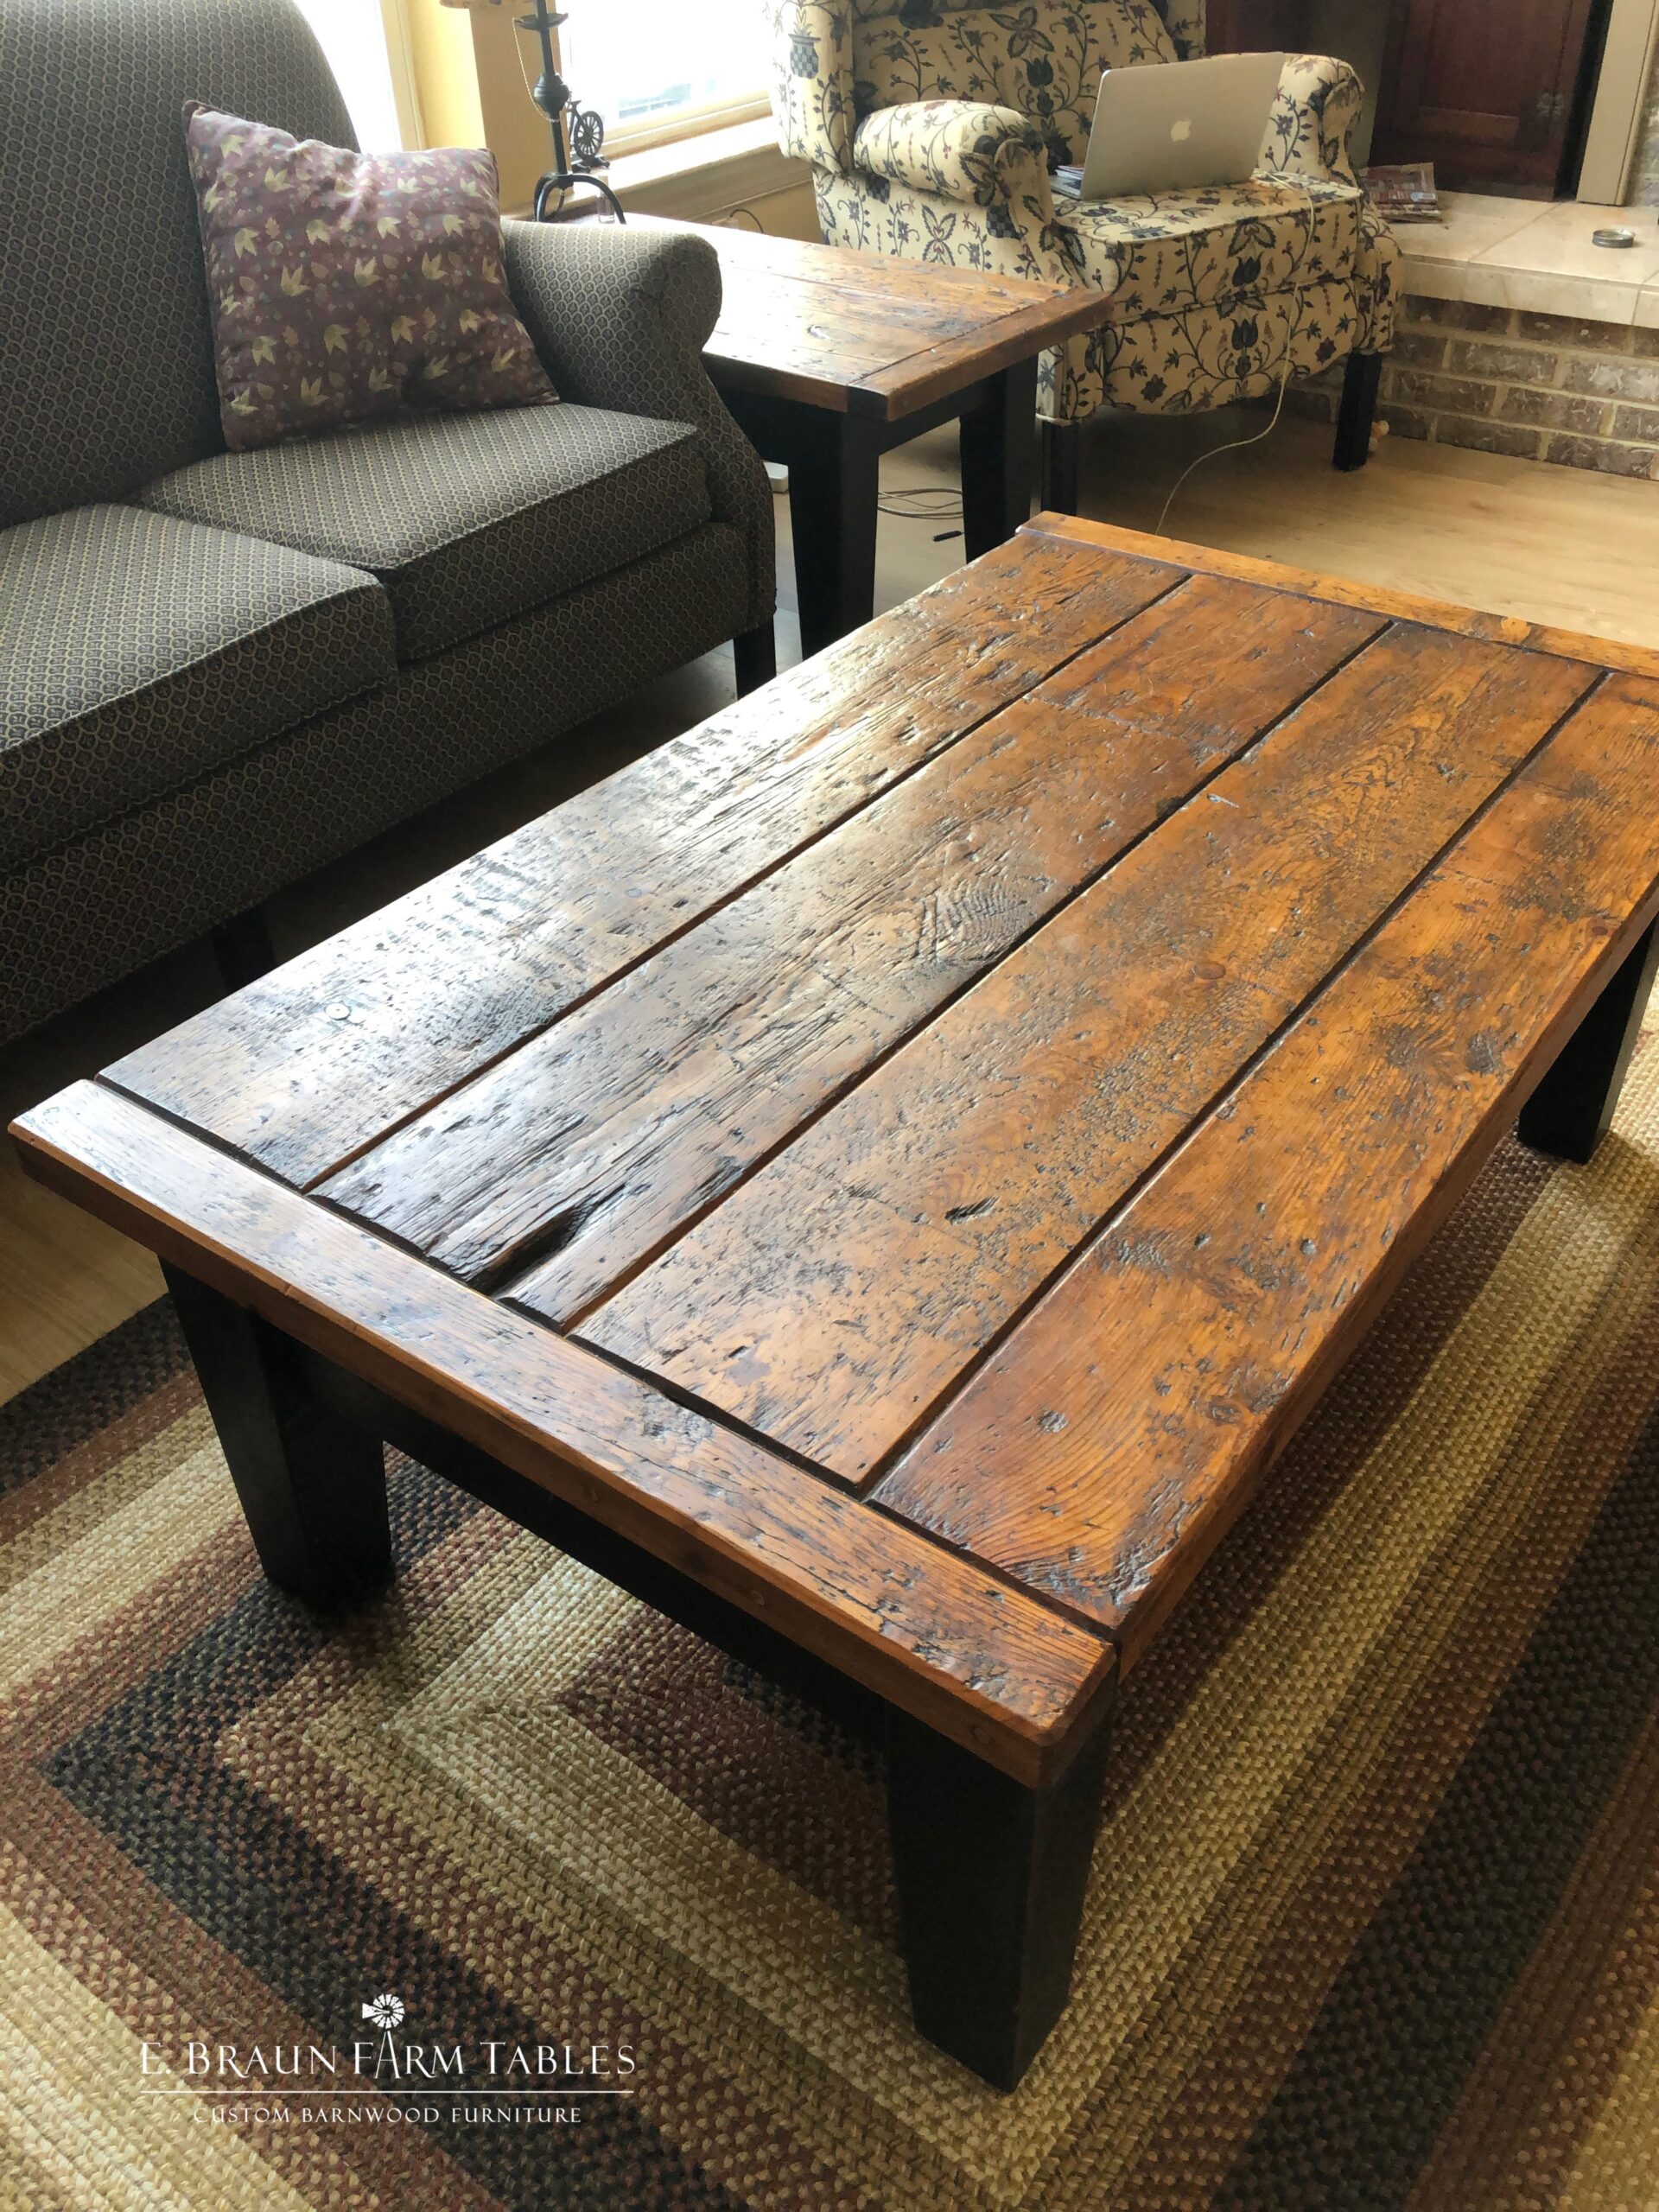 Reclaimed Wood Coffee Table- lets have a vintage Era